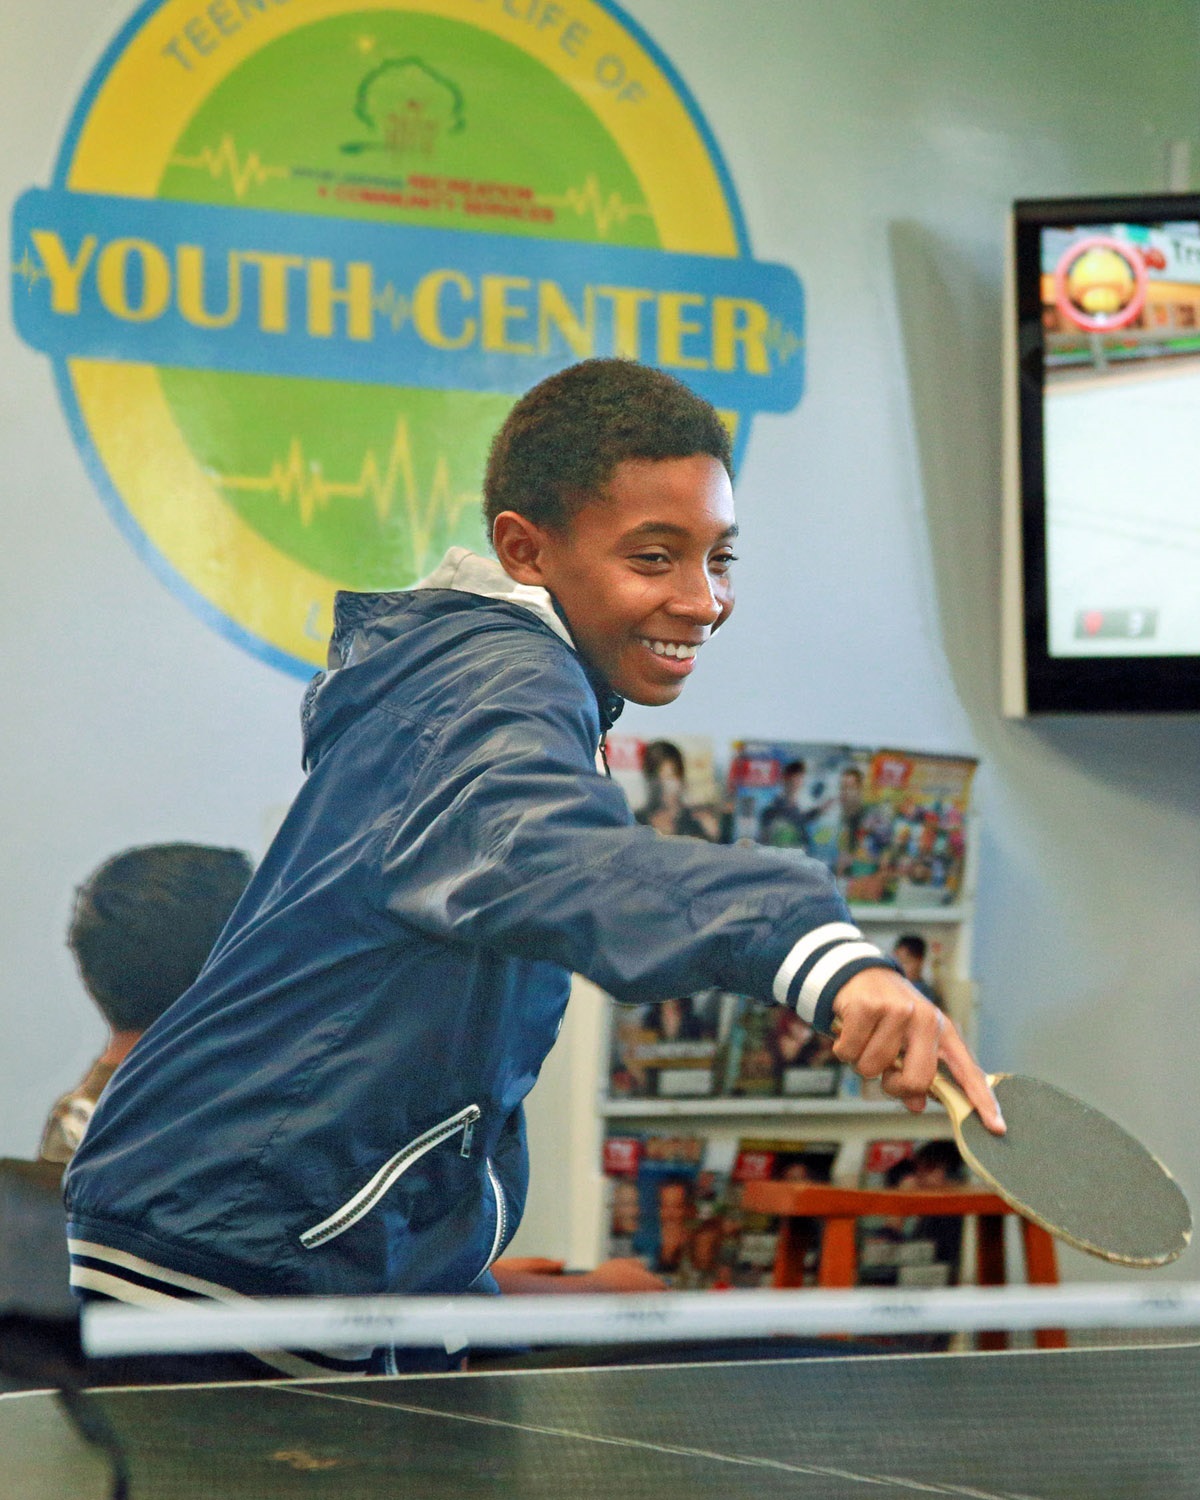 Youth Center ping pong game